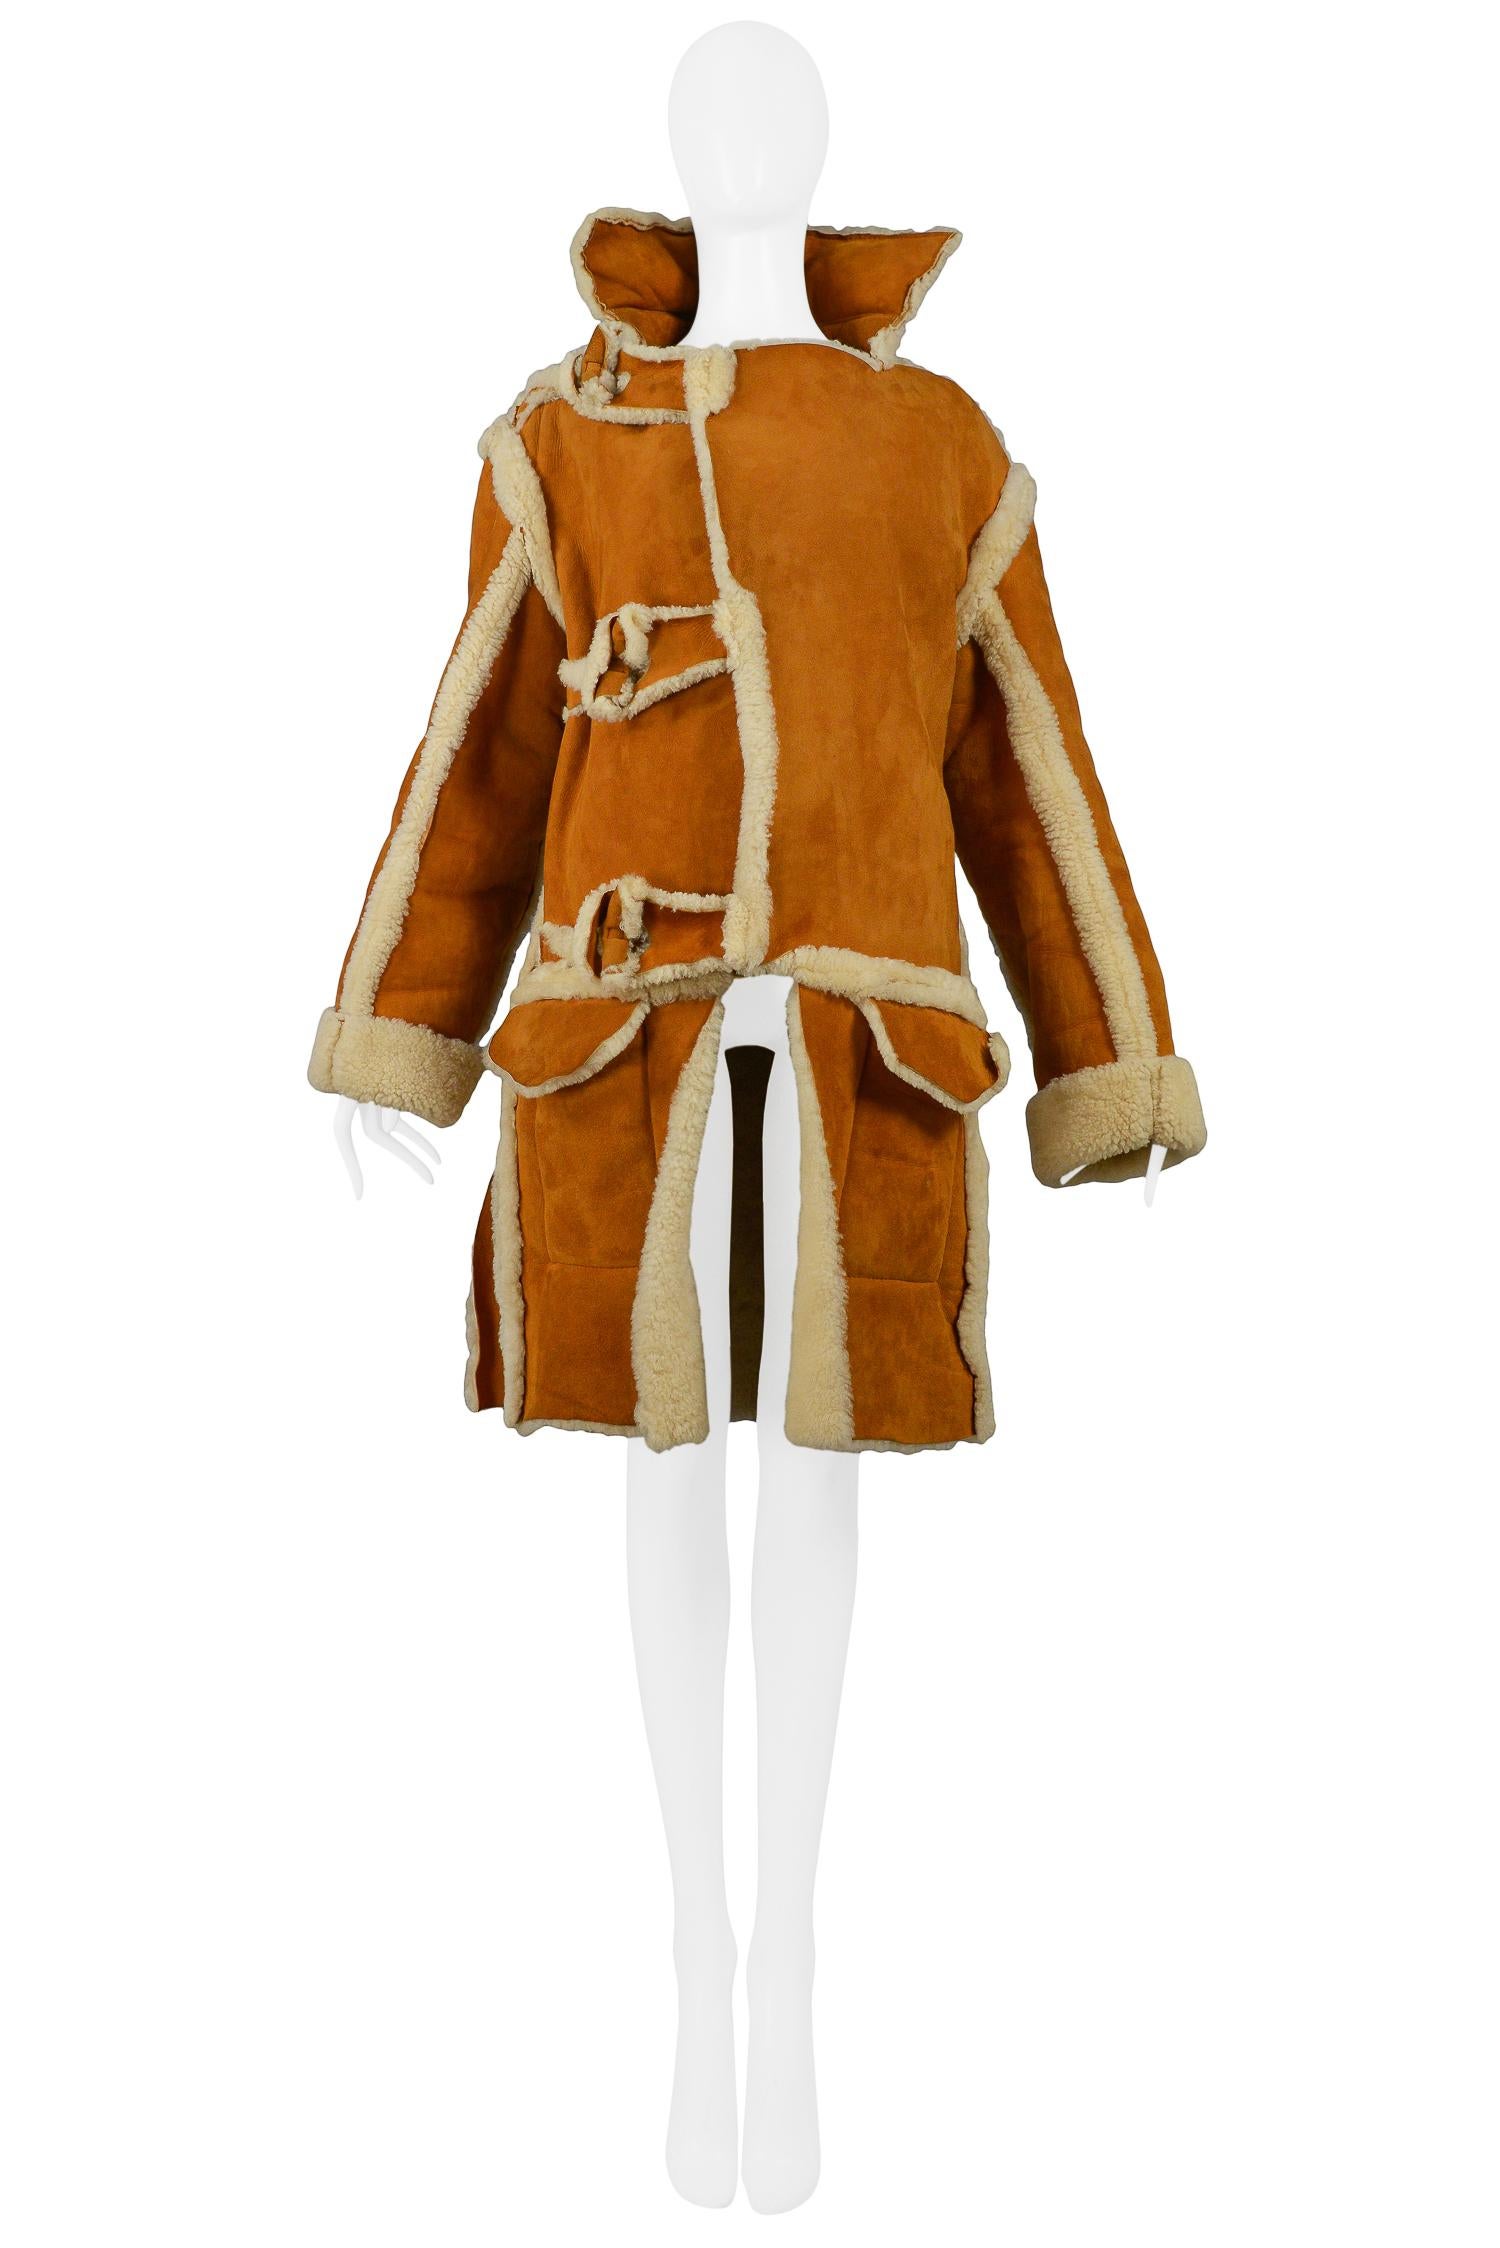 Vintage Malcolm McLaren unisex brown buffalo shearling coat with tan suede exterior featuring a stand-up collar, front pockets, shearling toggles and panels. This coat was done in the style of the World’s End collection he did with Vivienne, but he